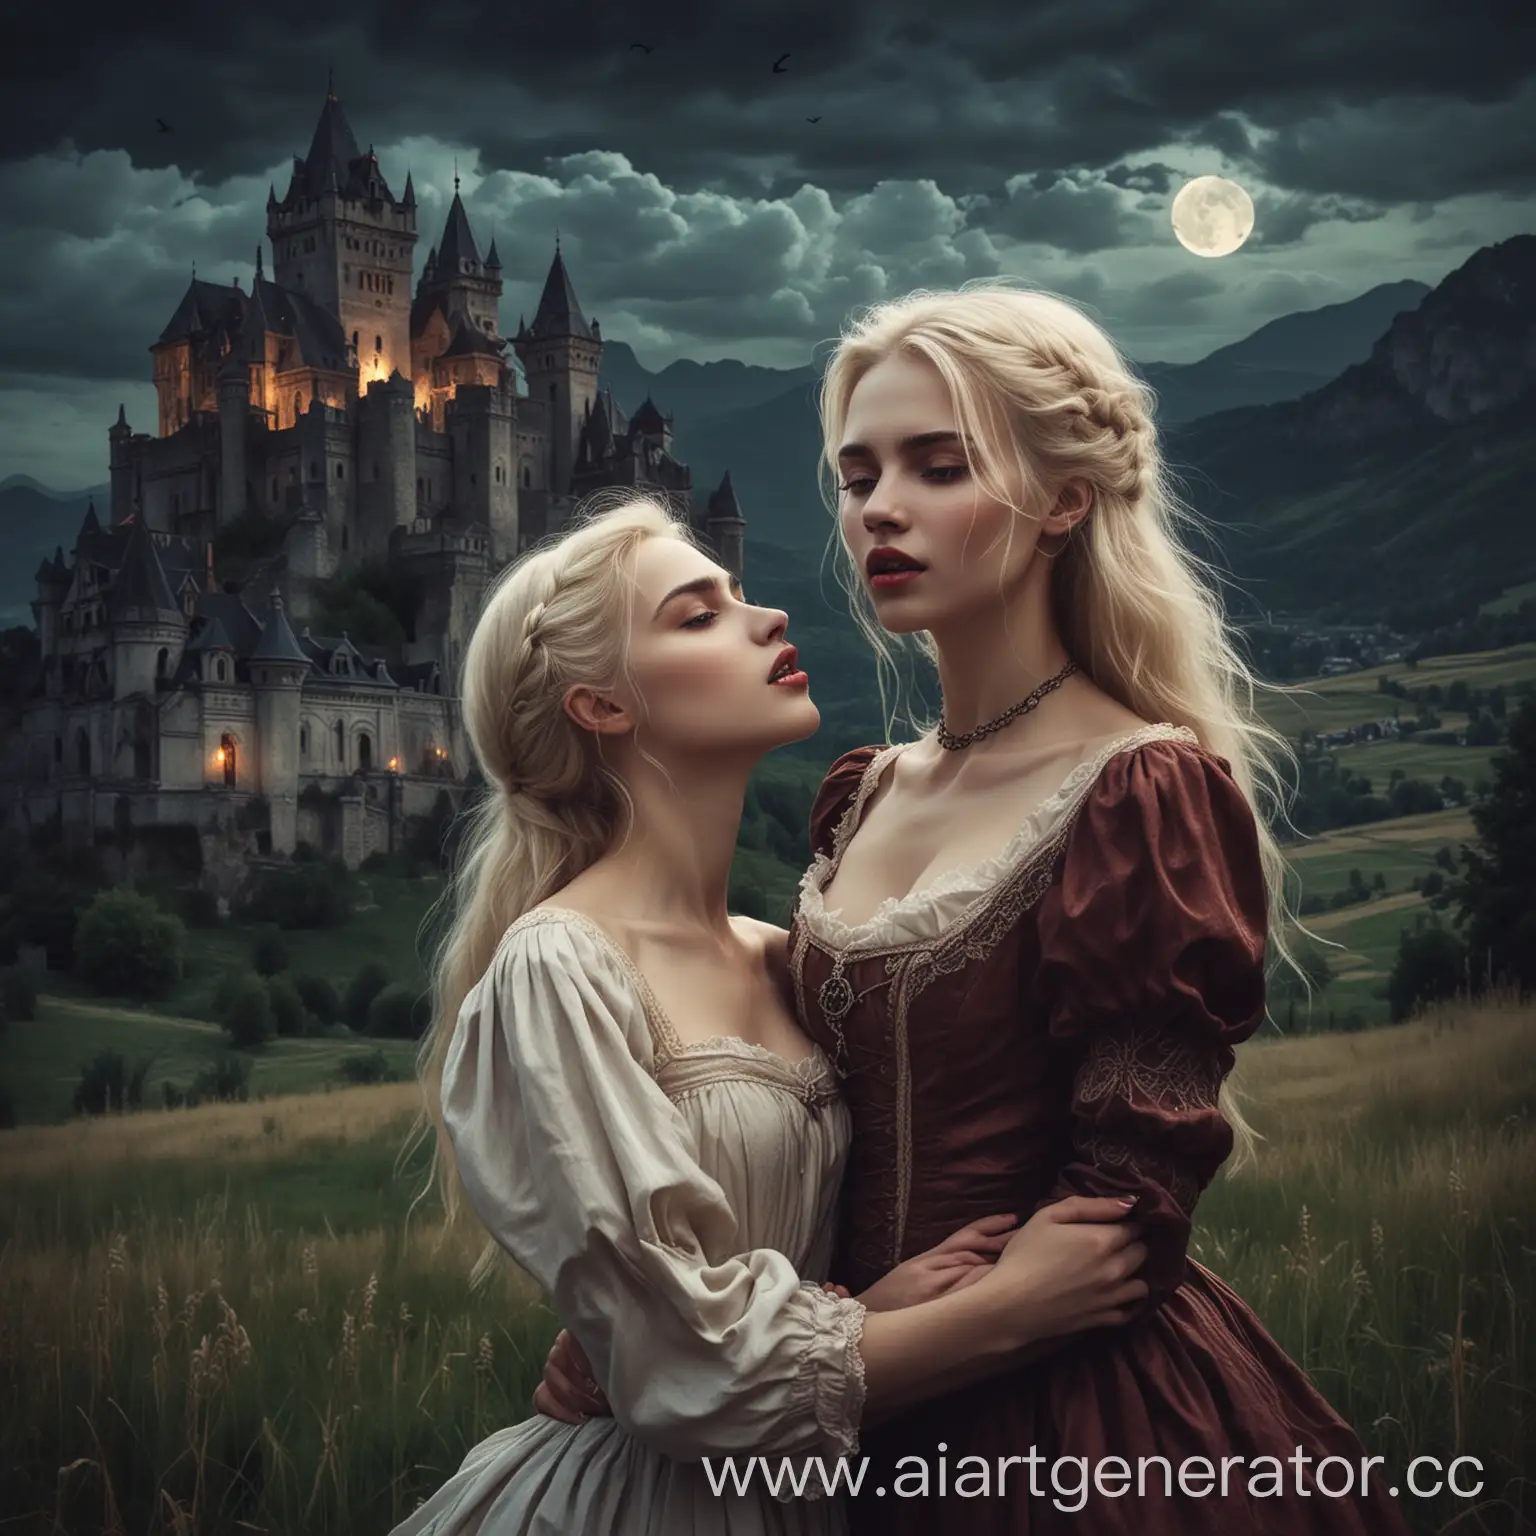 Young-Vampire-Biting-Pale-Girl-by-Ancient-Castle-in-Romantic-Night-Scene